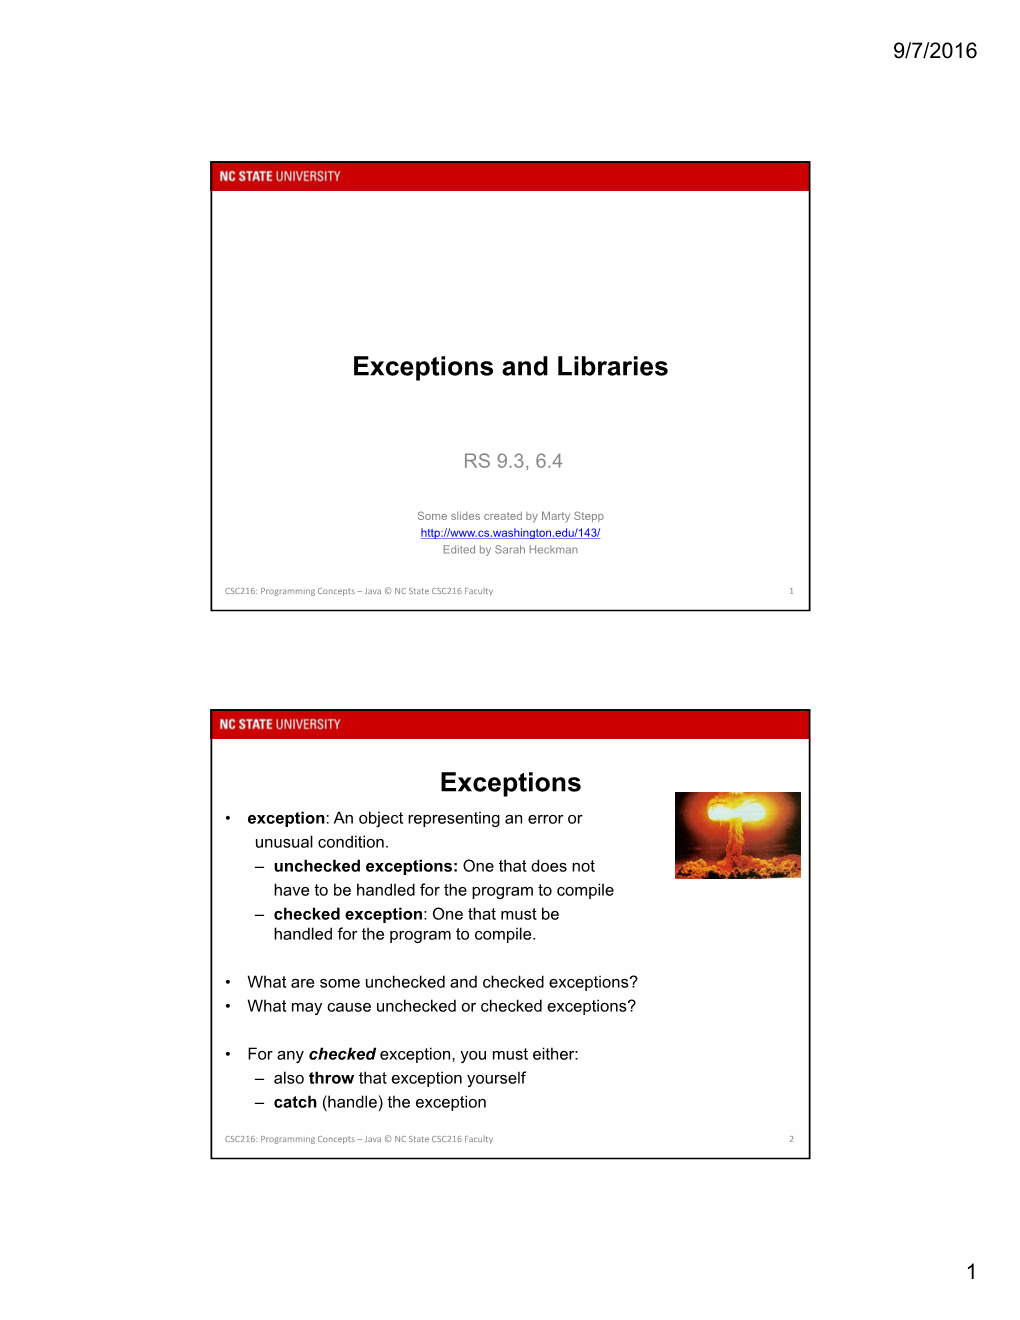 Exceptions and Libraries